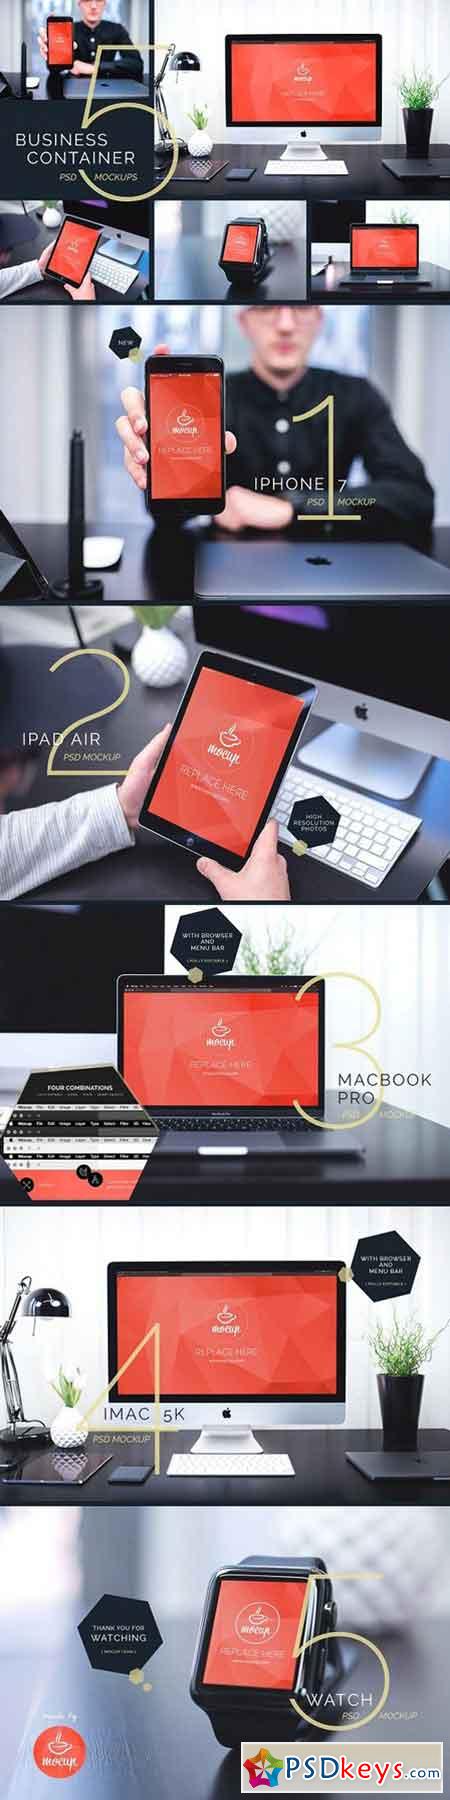 5 PSD Mockups Business Container 1259553